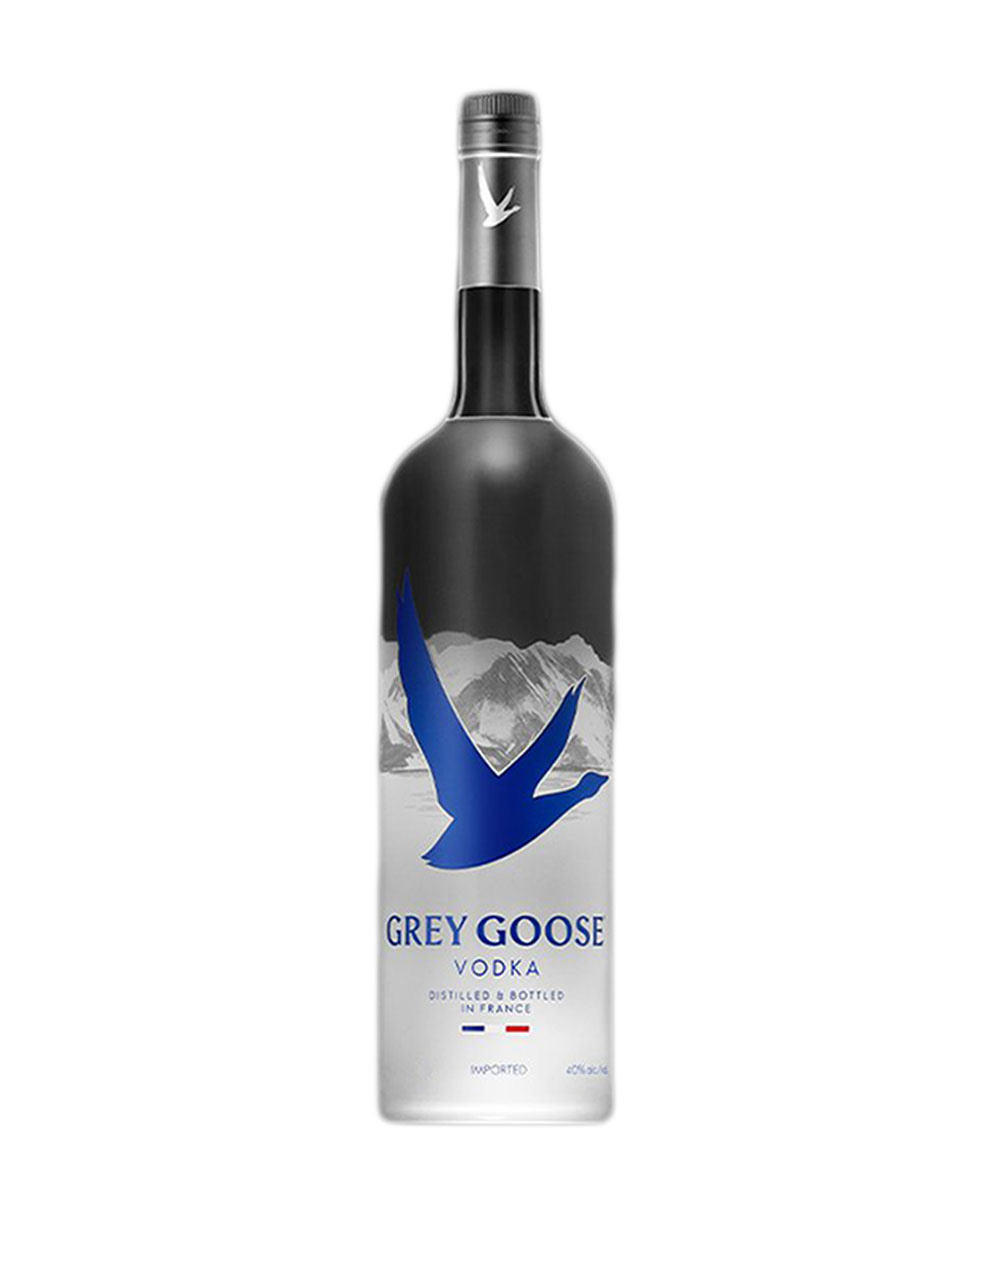 Grey Goose Night Vision Limited Edition 1L